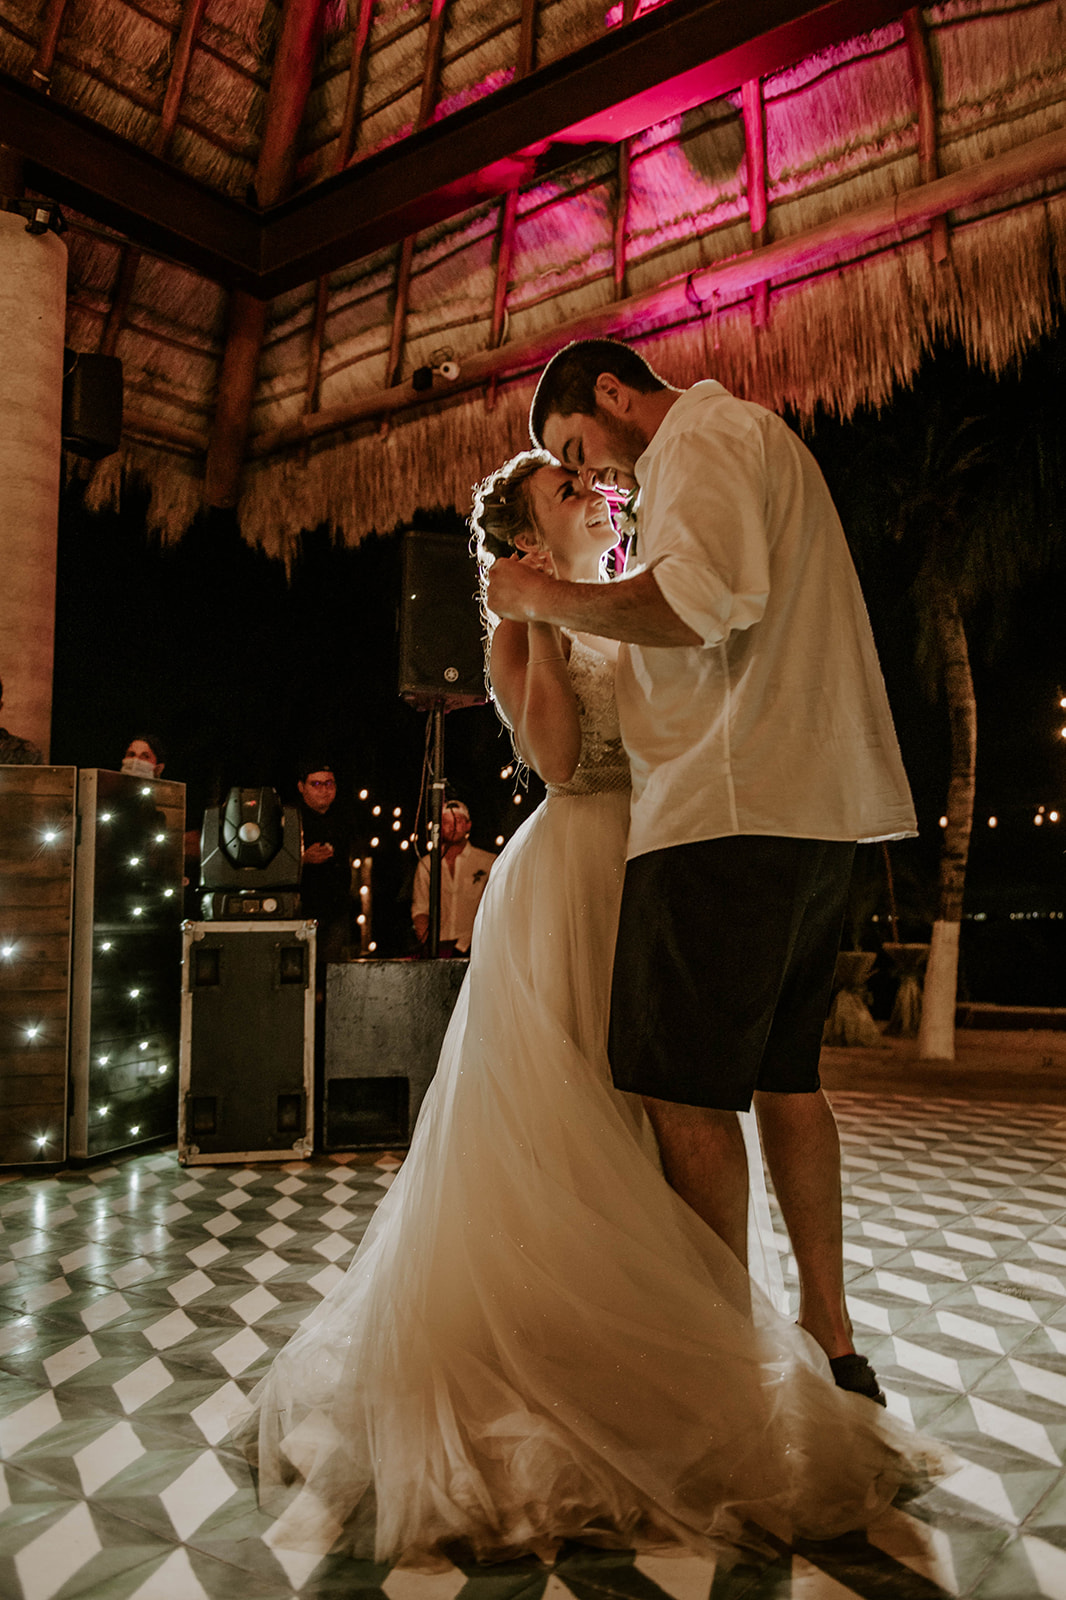 Bride and groom sharing their first dance at Zama